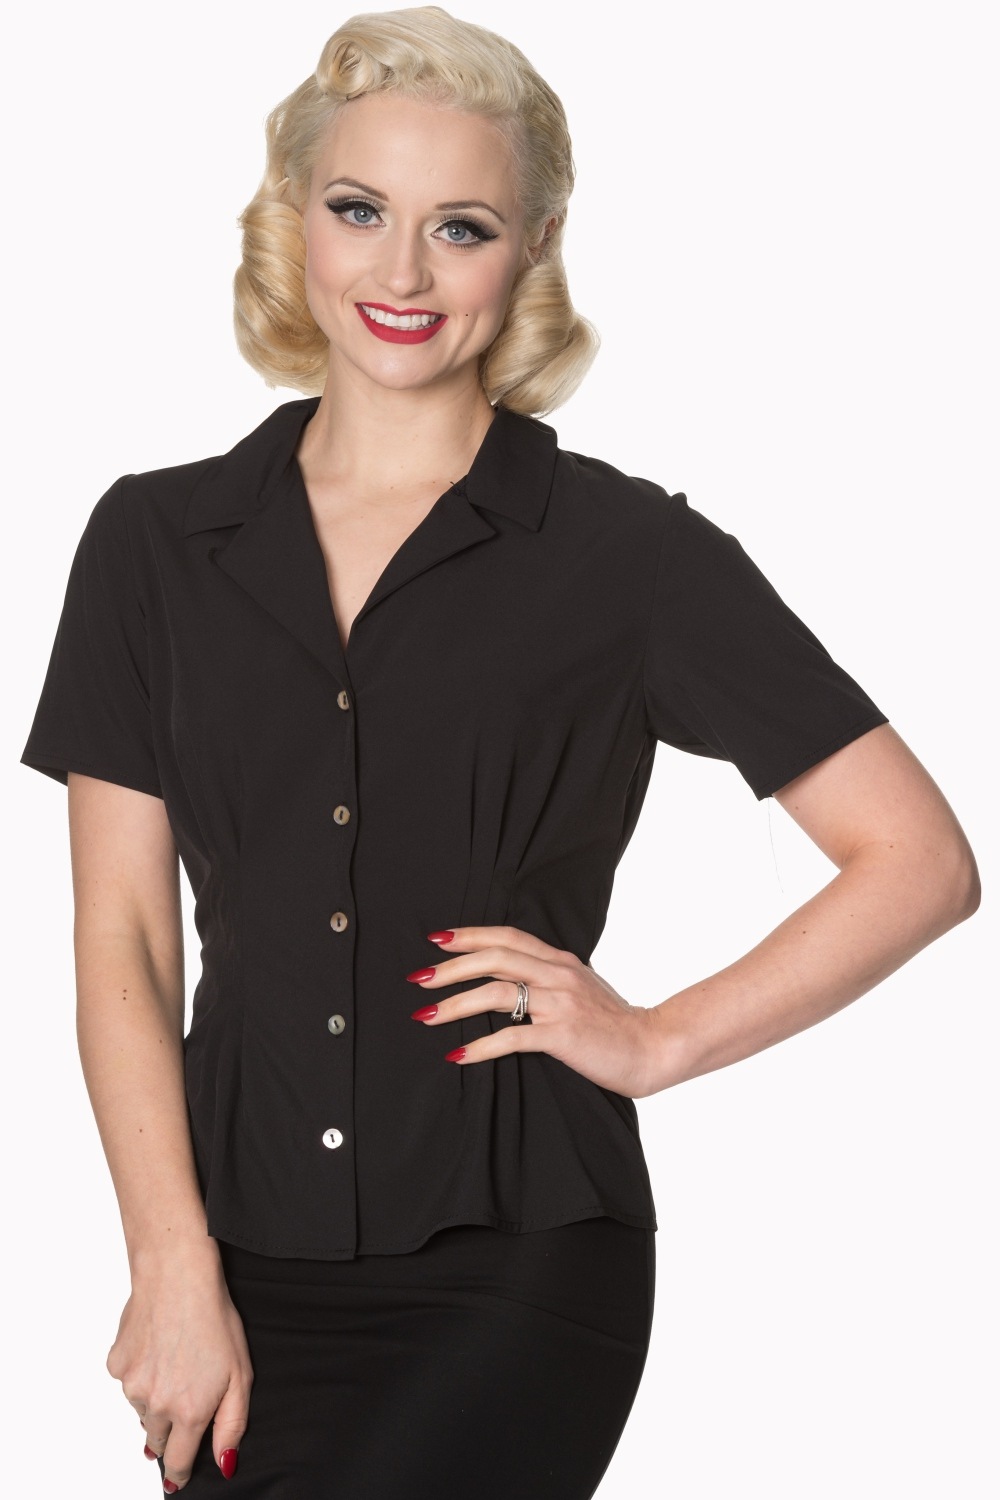 BNBL1274BLKbb_chemisier-blouse-pin-up-retro-50-s-rockabilly-classic-glamour